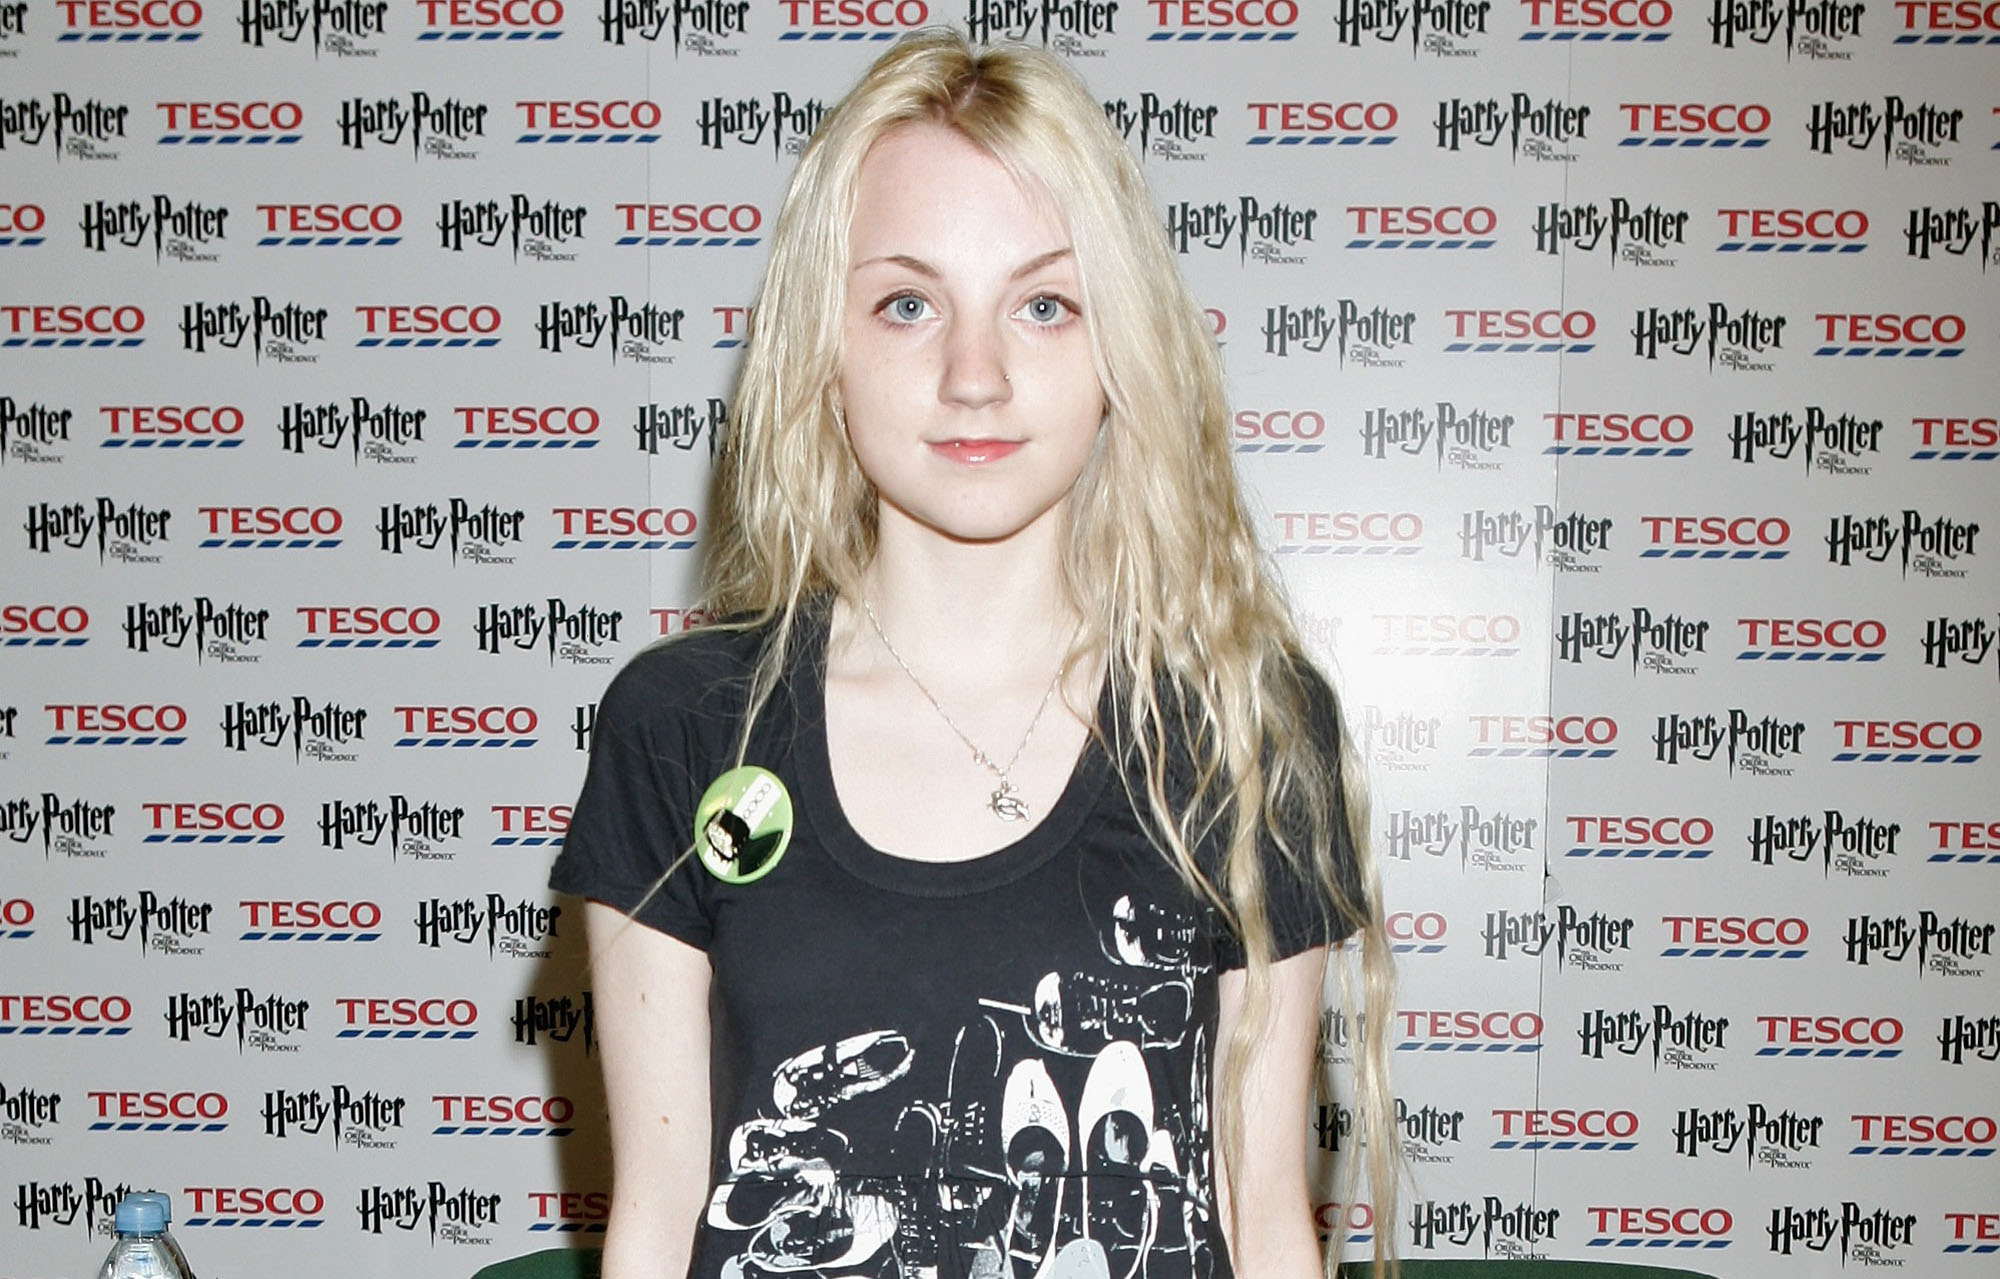 Harry Potter actress Evanna Lynch (Luna Lovegood) poses for a photograph at a photocall in Tescos Extra Watford on July 14, 2007 in London, England.  (Photo by Chris Jackson/Getty Images) (Chris Jackson—Getty Images)